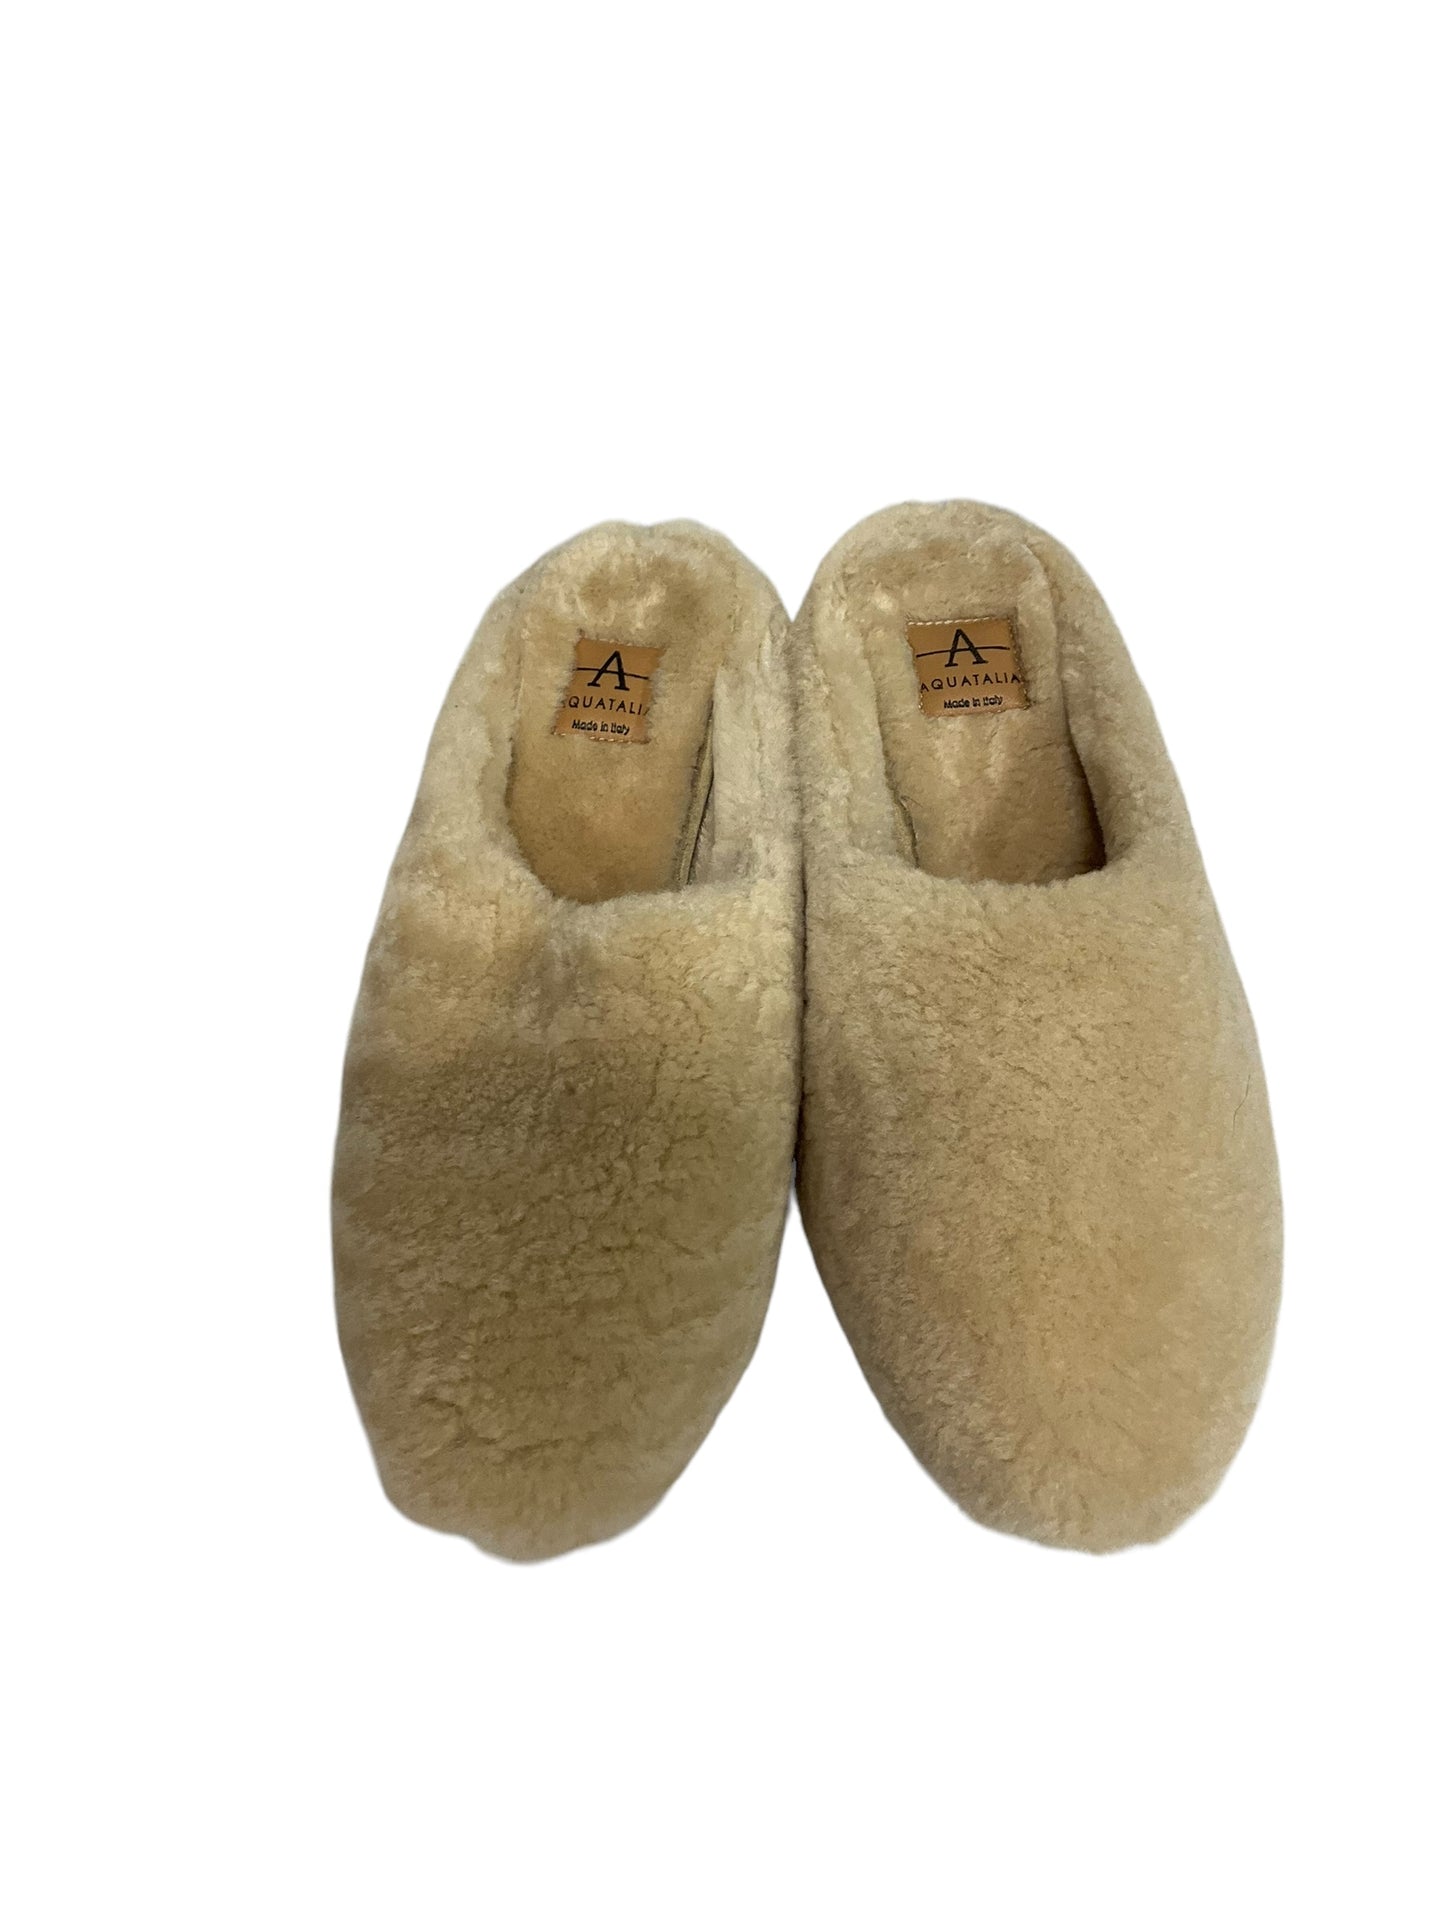 Slippers By Aquatalia  Size: 8.5